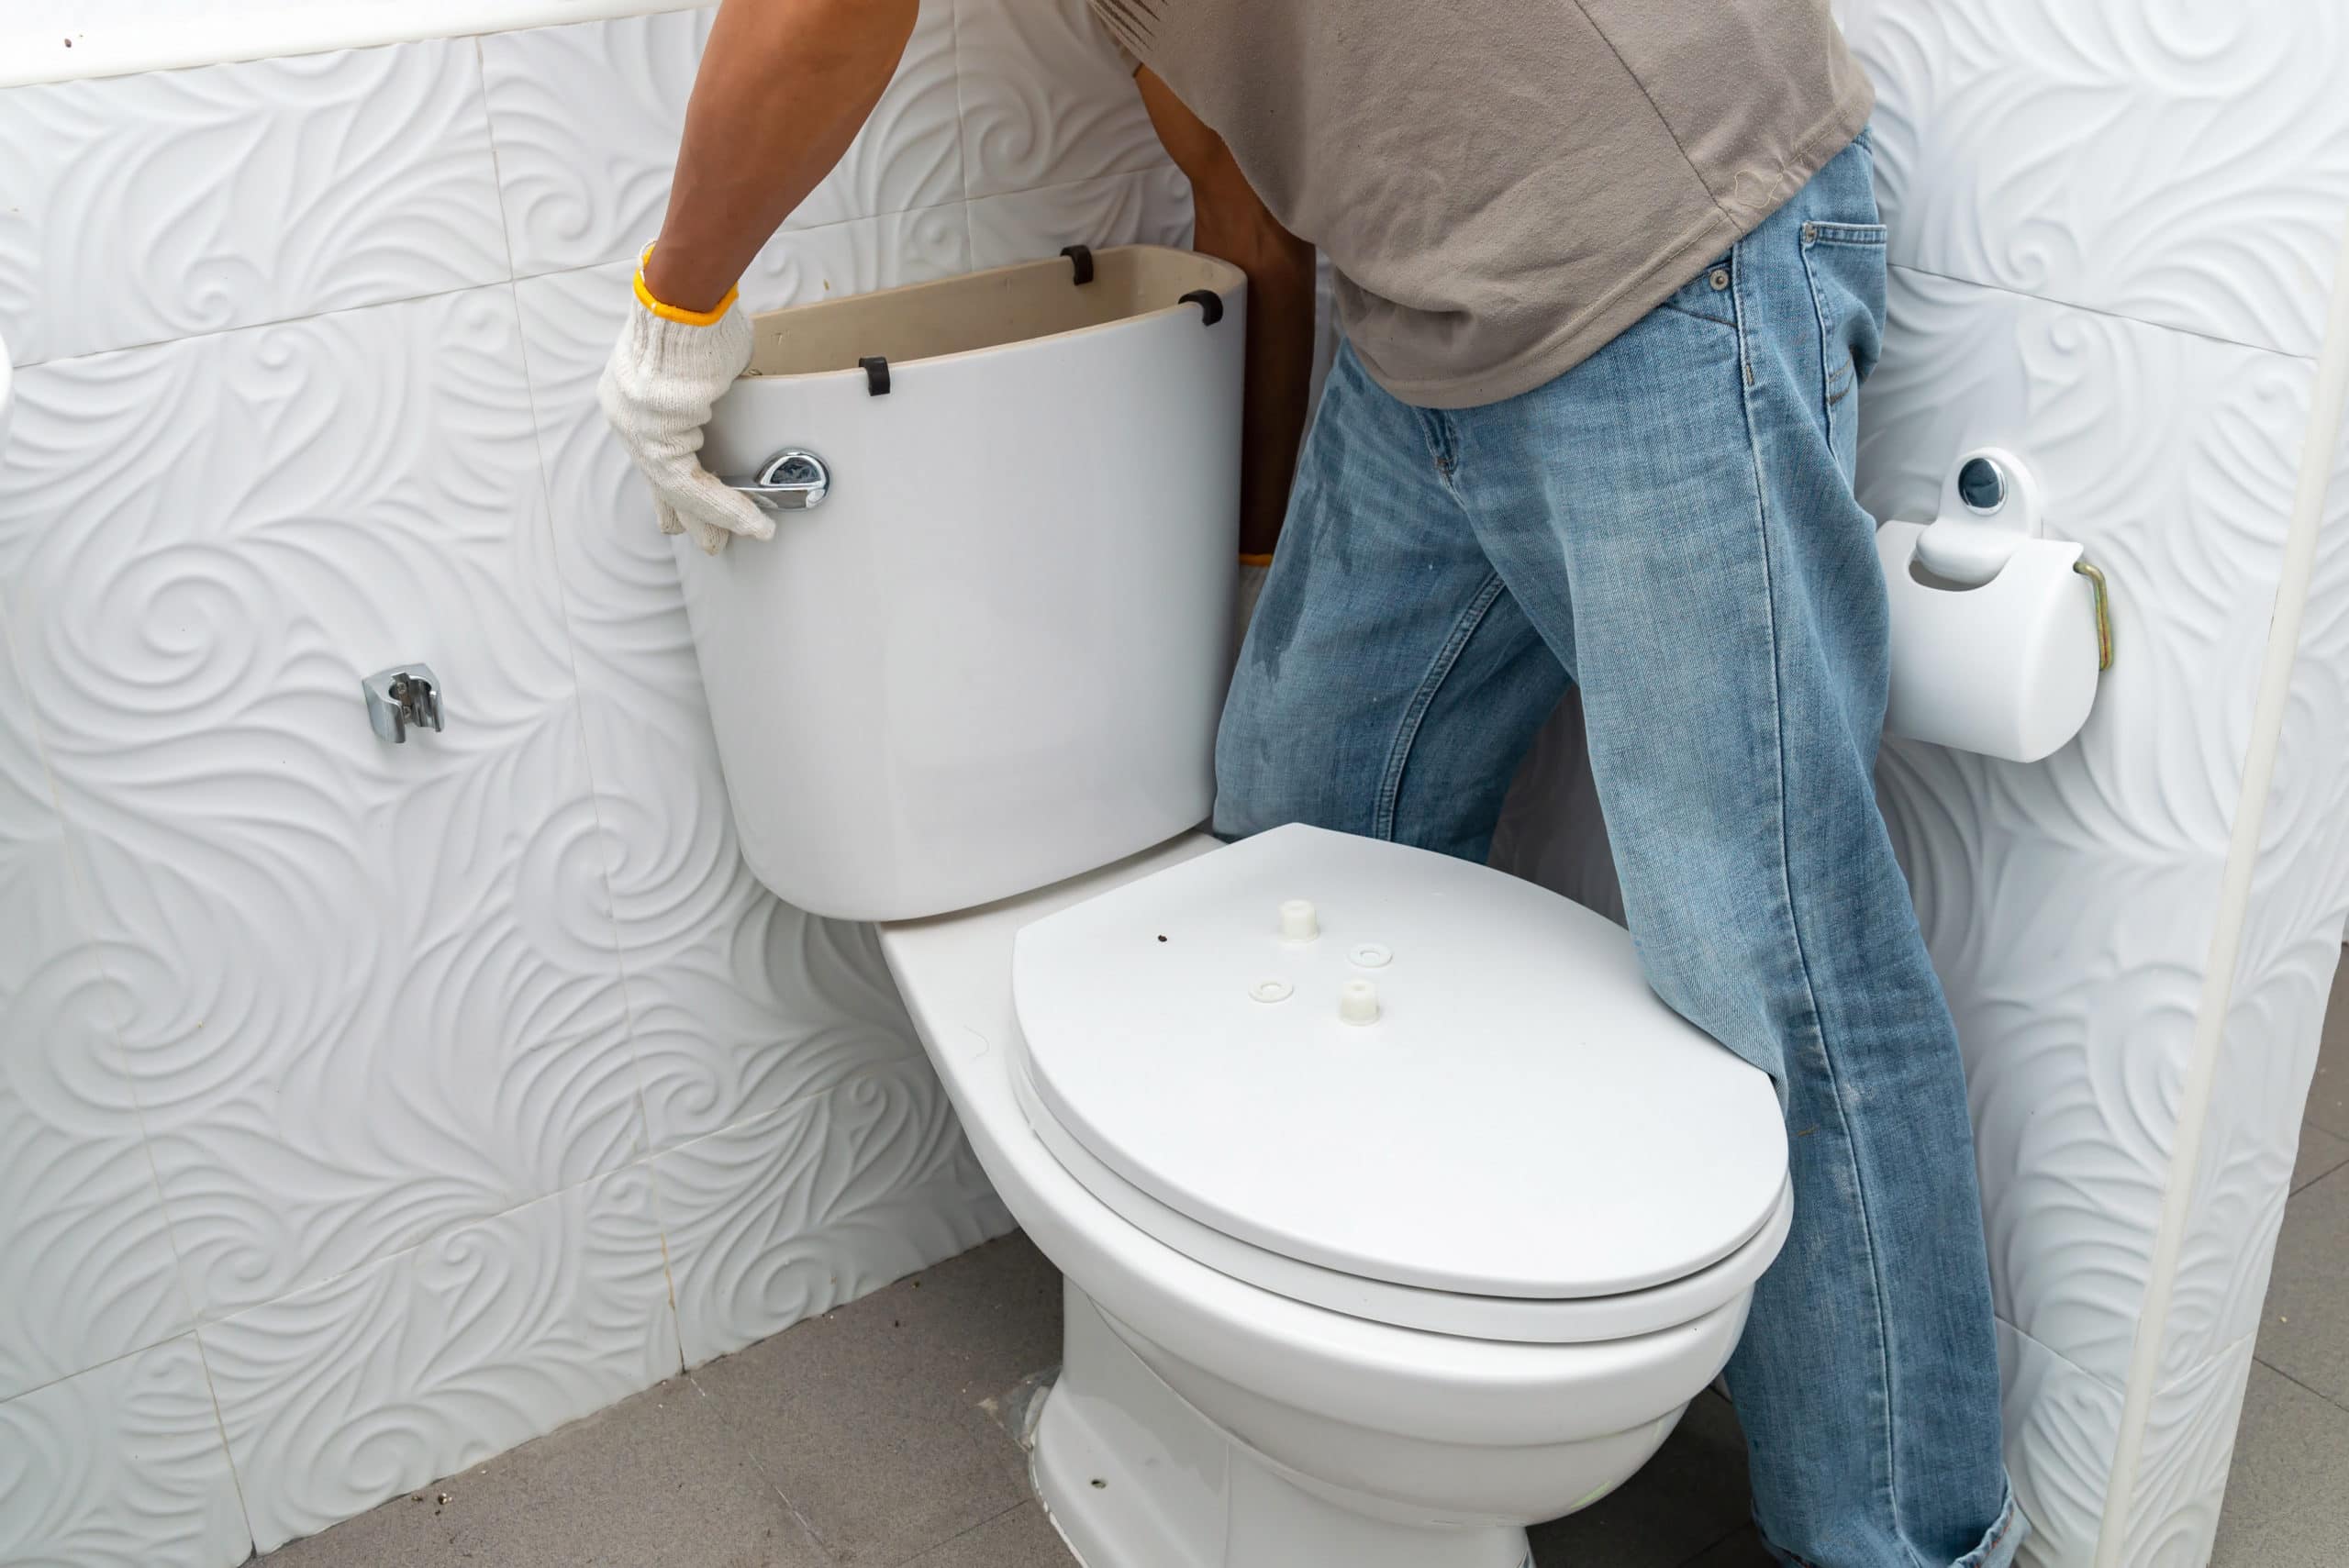 handman removing the toilet tank from toilet